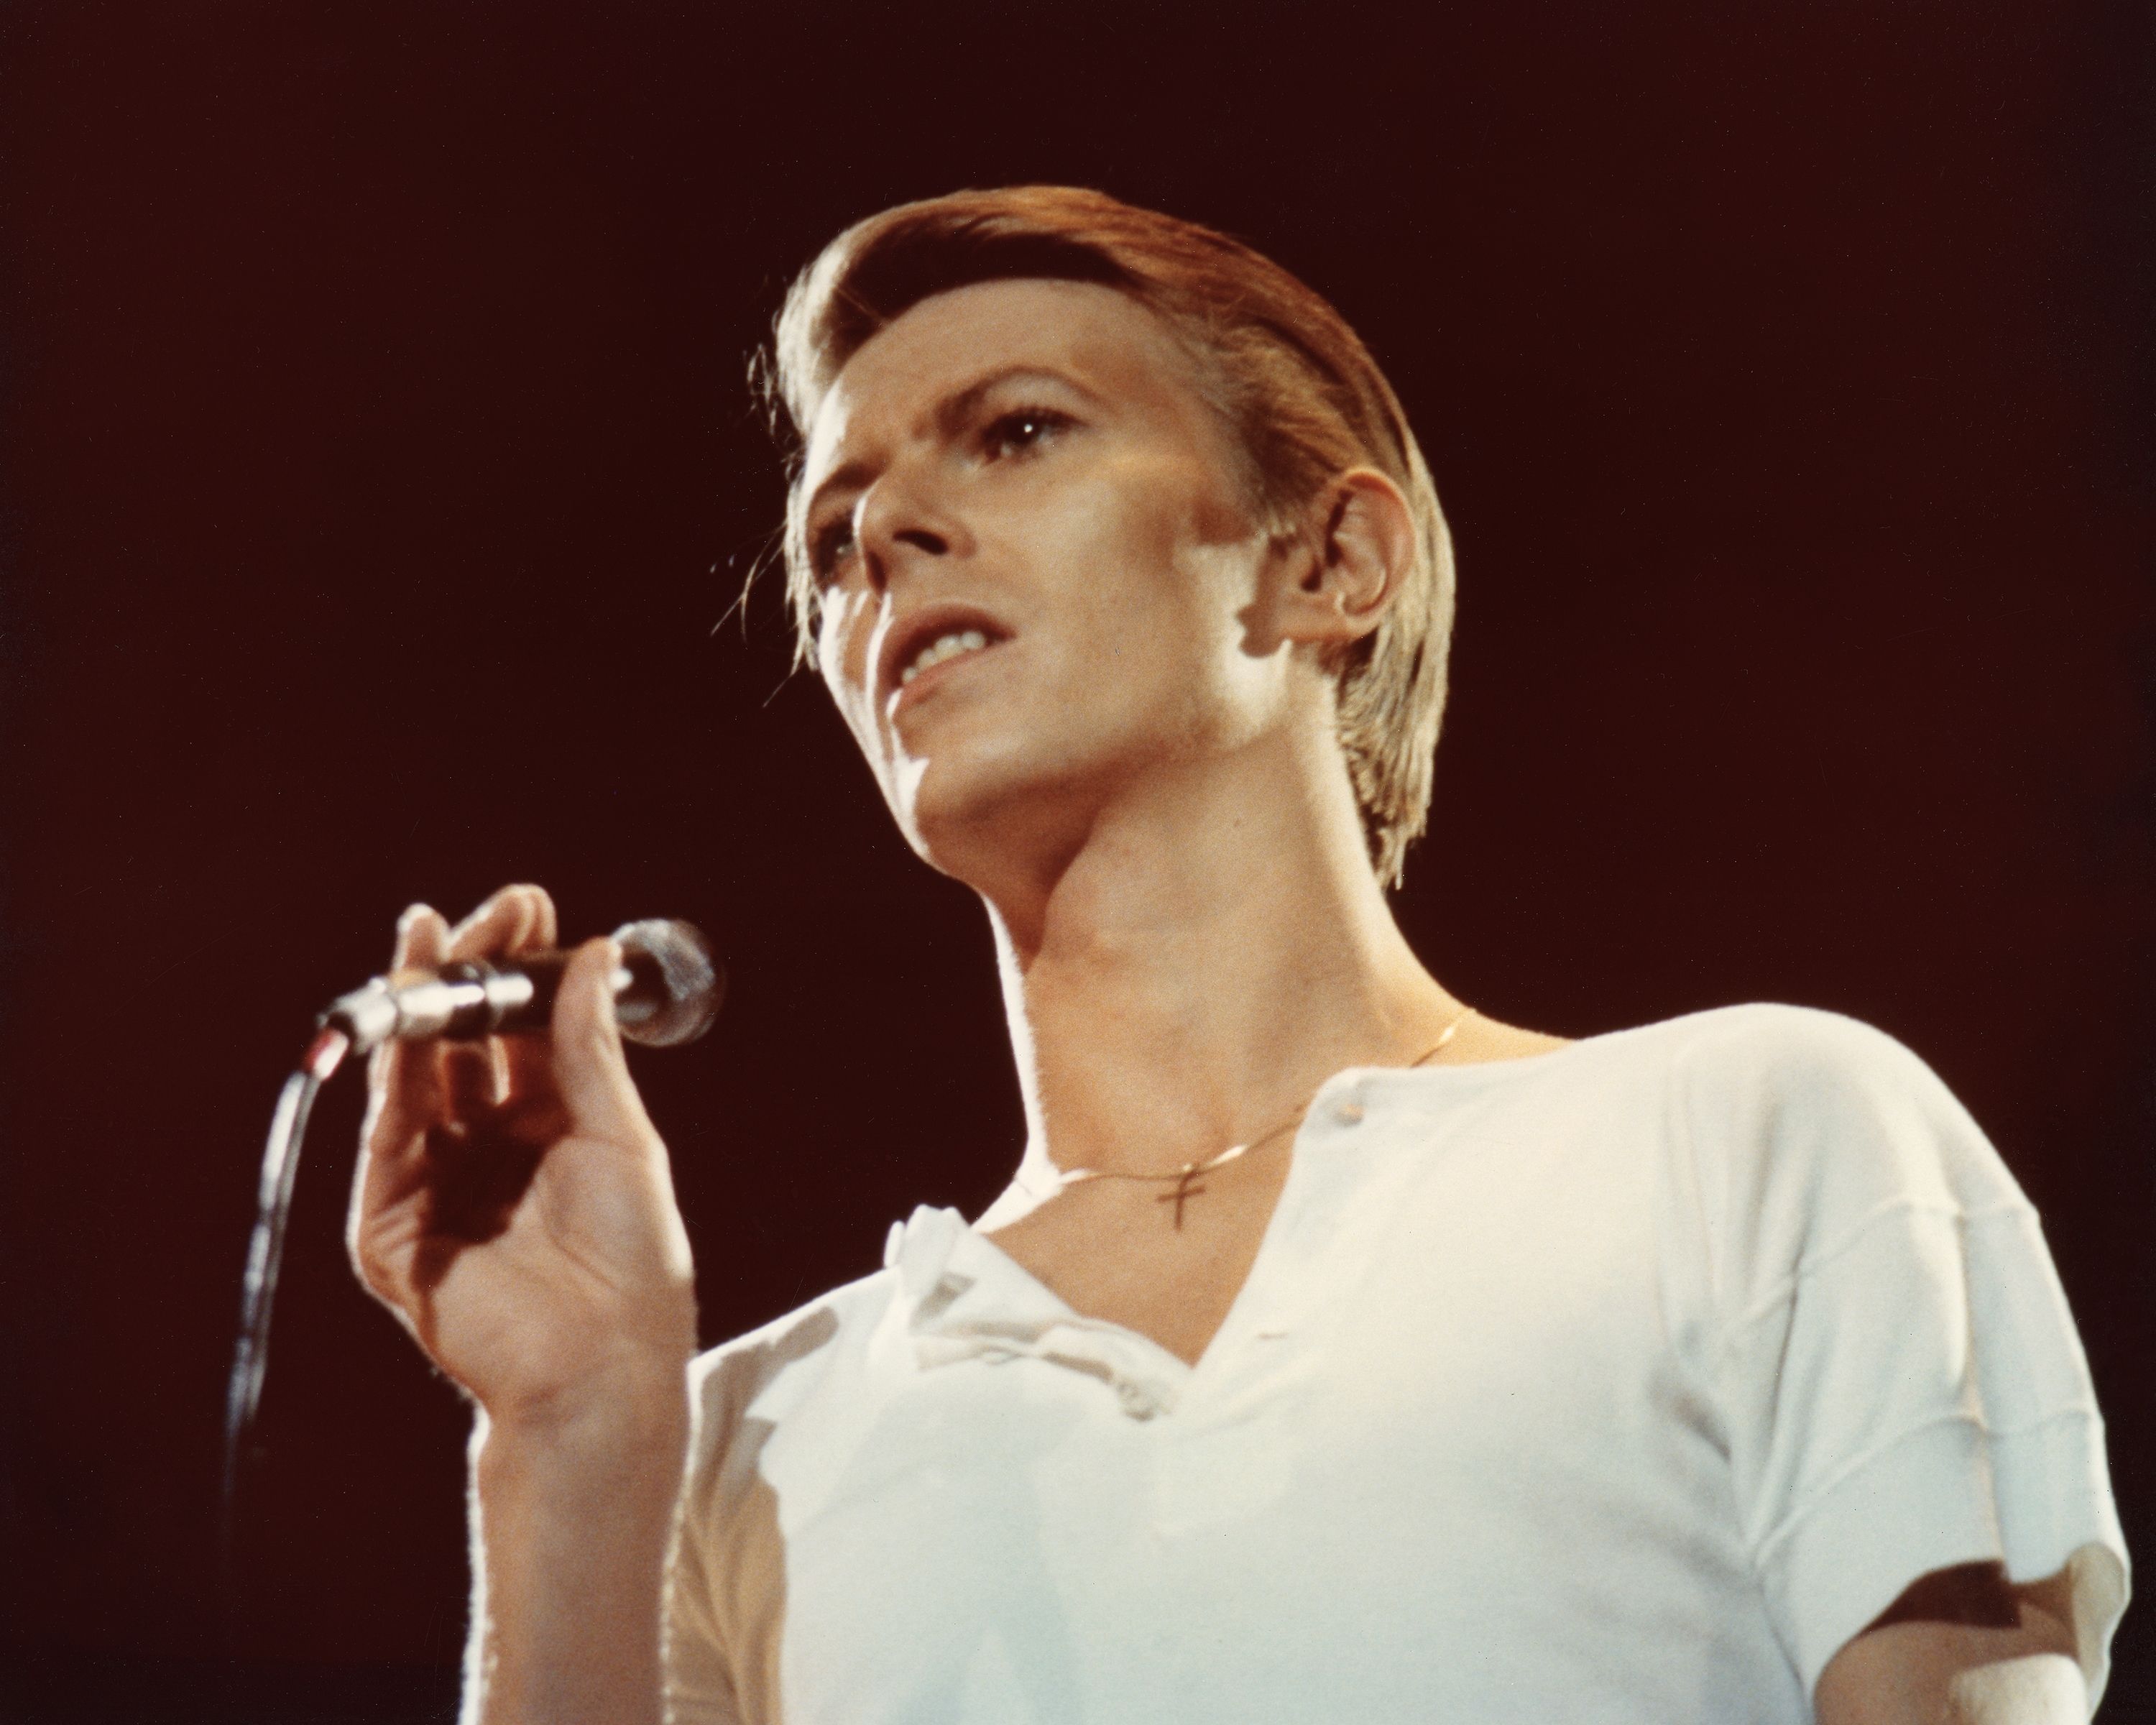 A photo of David Bowie Singing.